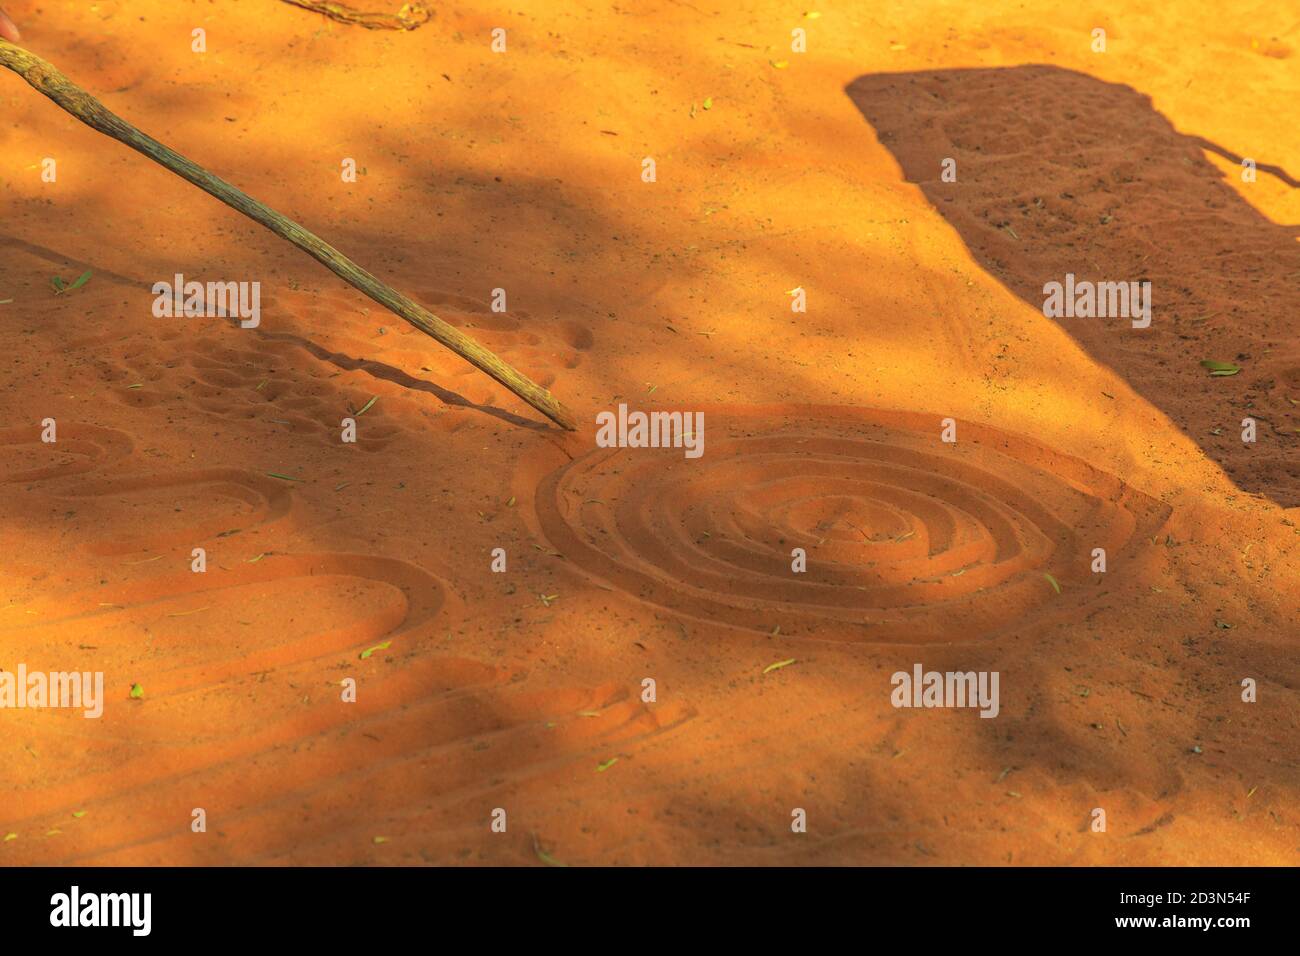 Kings Creek Station, Northern Territory, Australia - Aug 21, 2019: aboriginal people creating shapes with red sand on the ground in aboriginal art Stock Photo